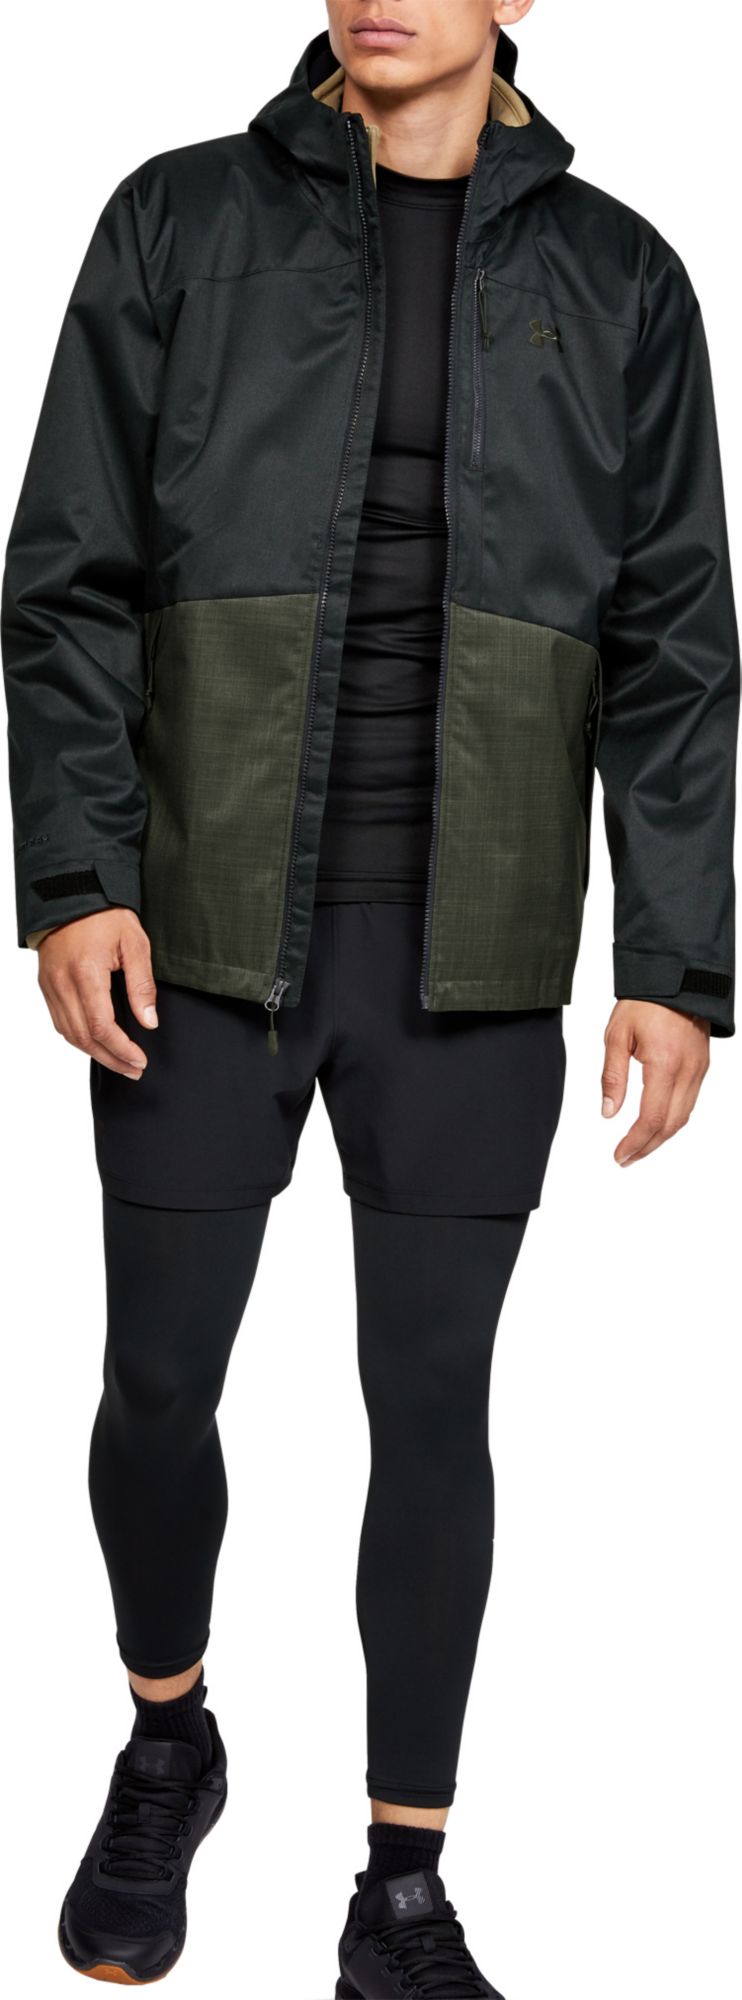 under armour 2 in 1 jacket